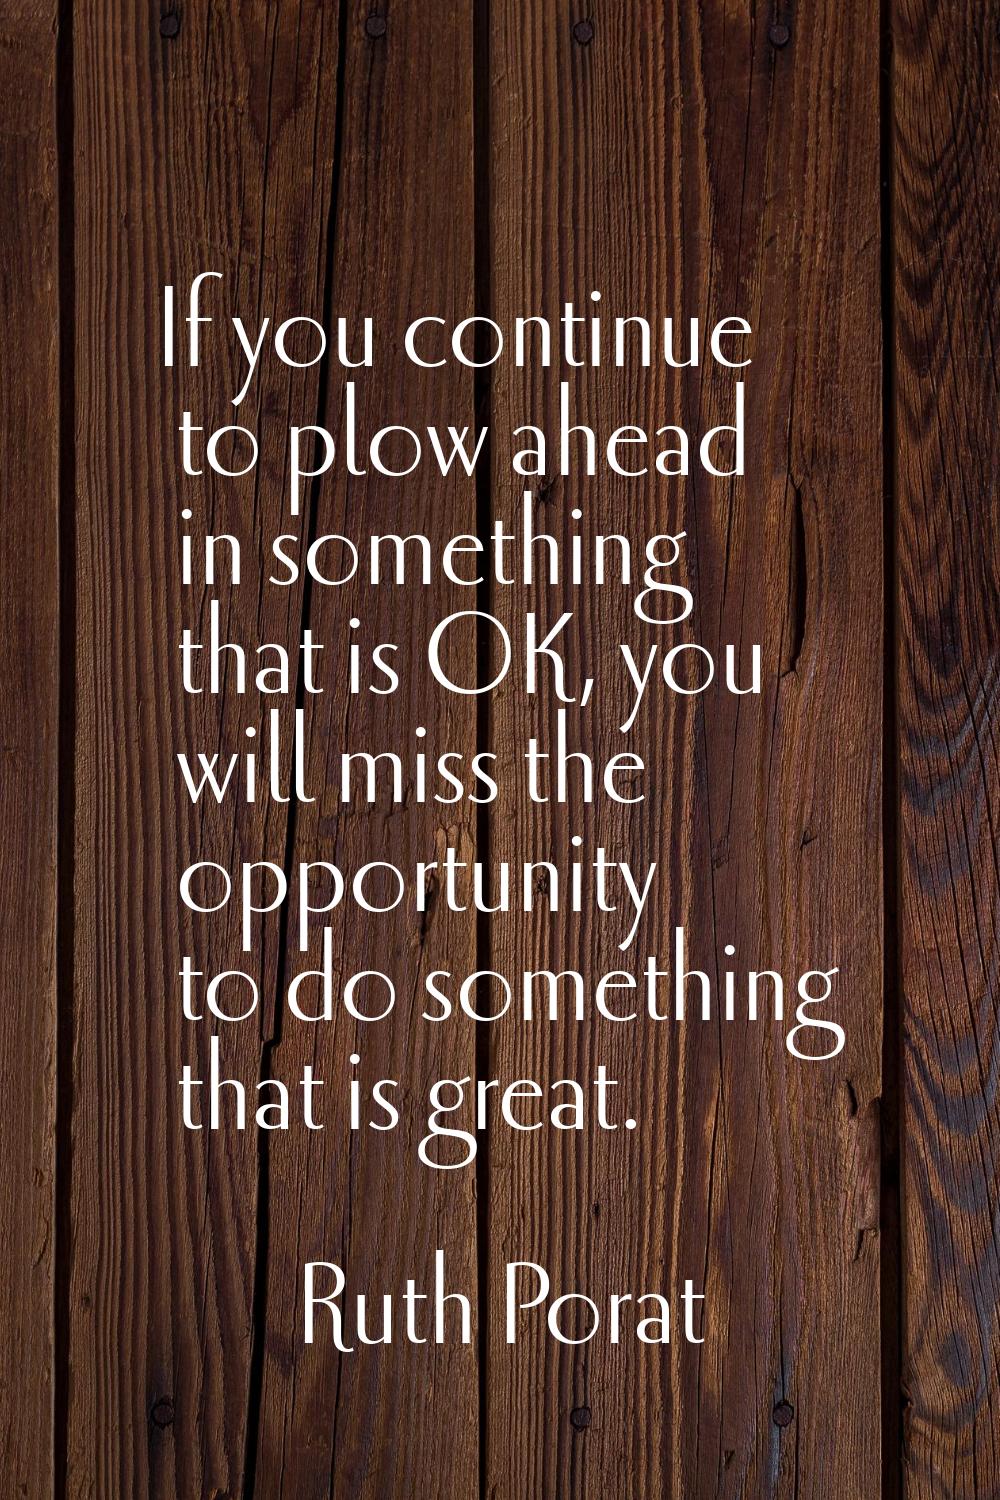 If you continue to plow ahead in something that is OK, you will miss the opportunity to do somethin